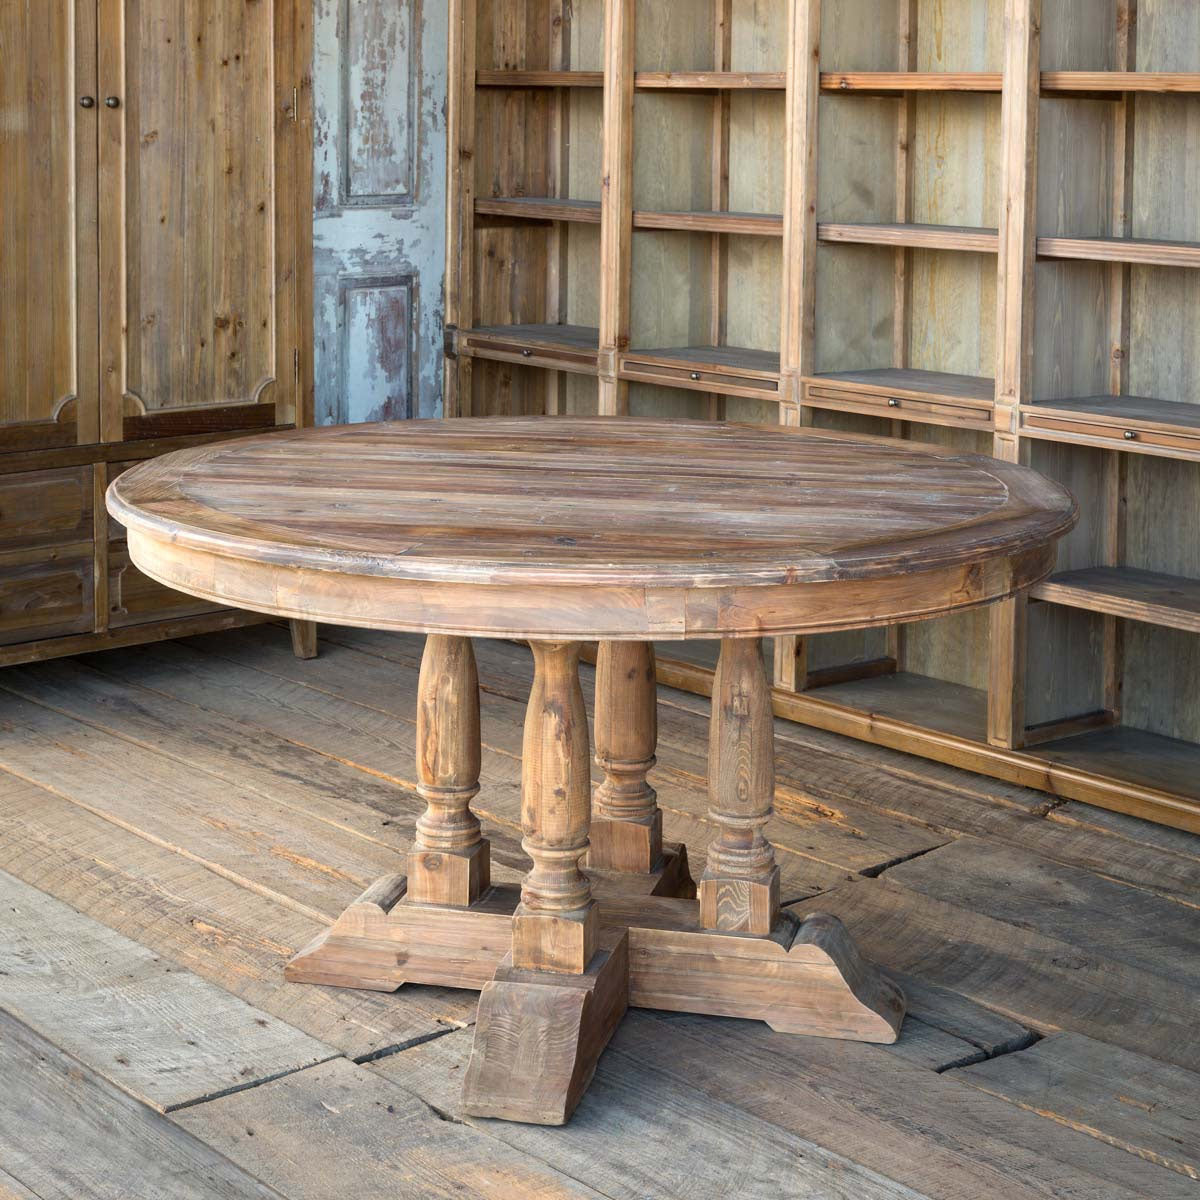 Old Pine Balustrade Table - More Coming